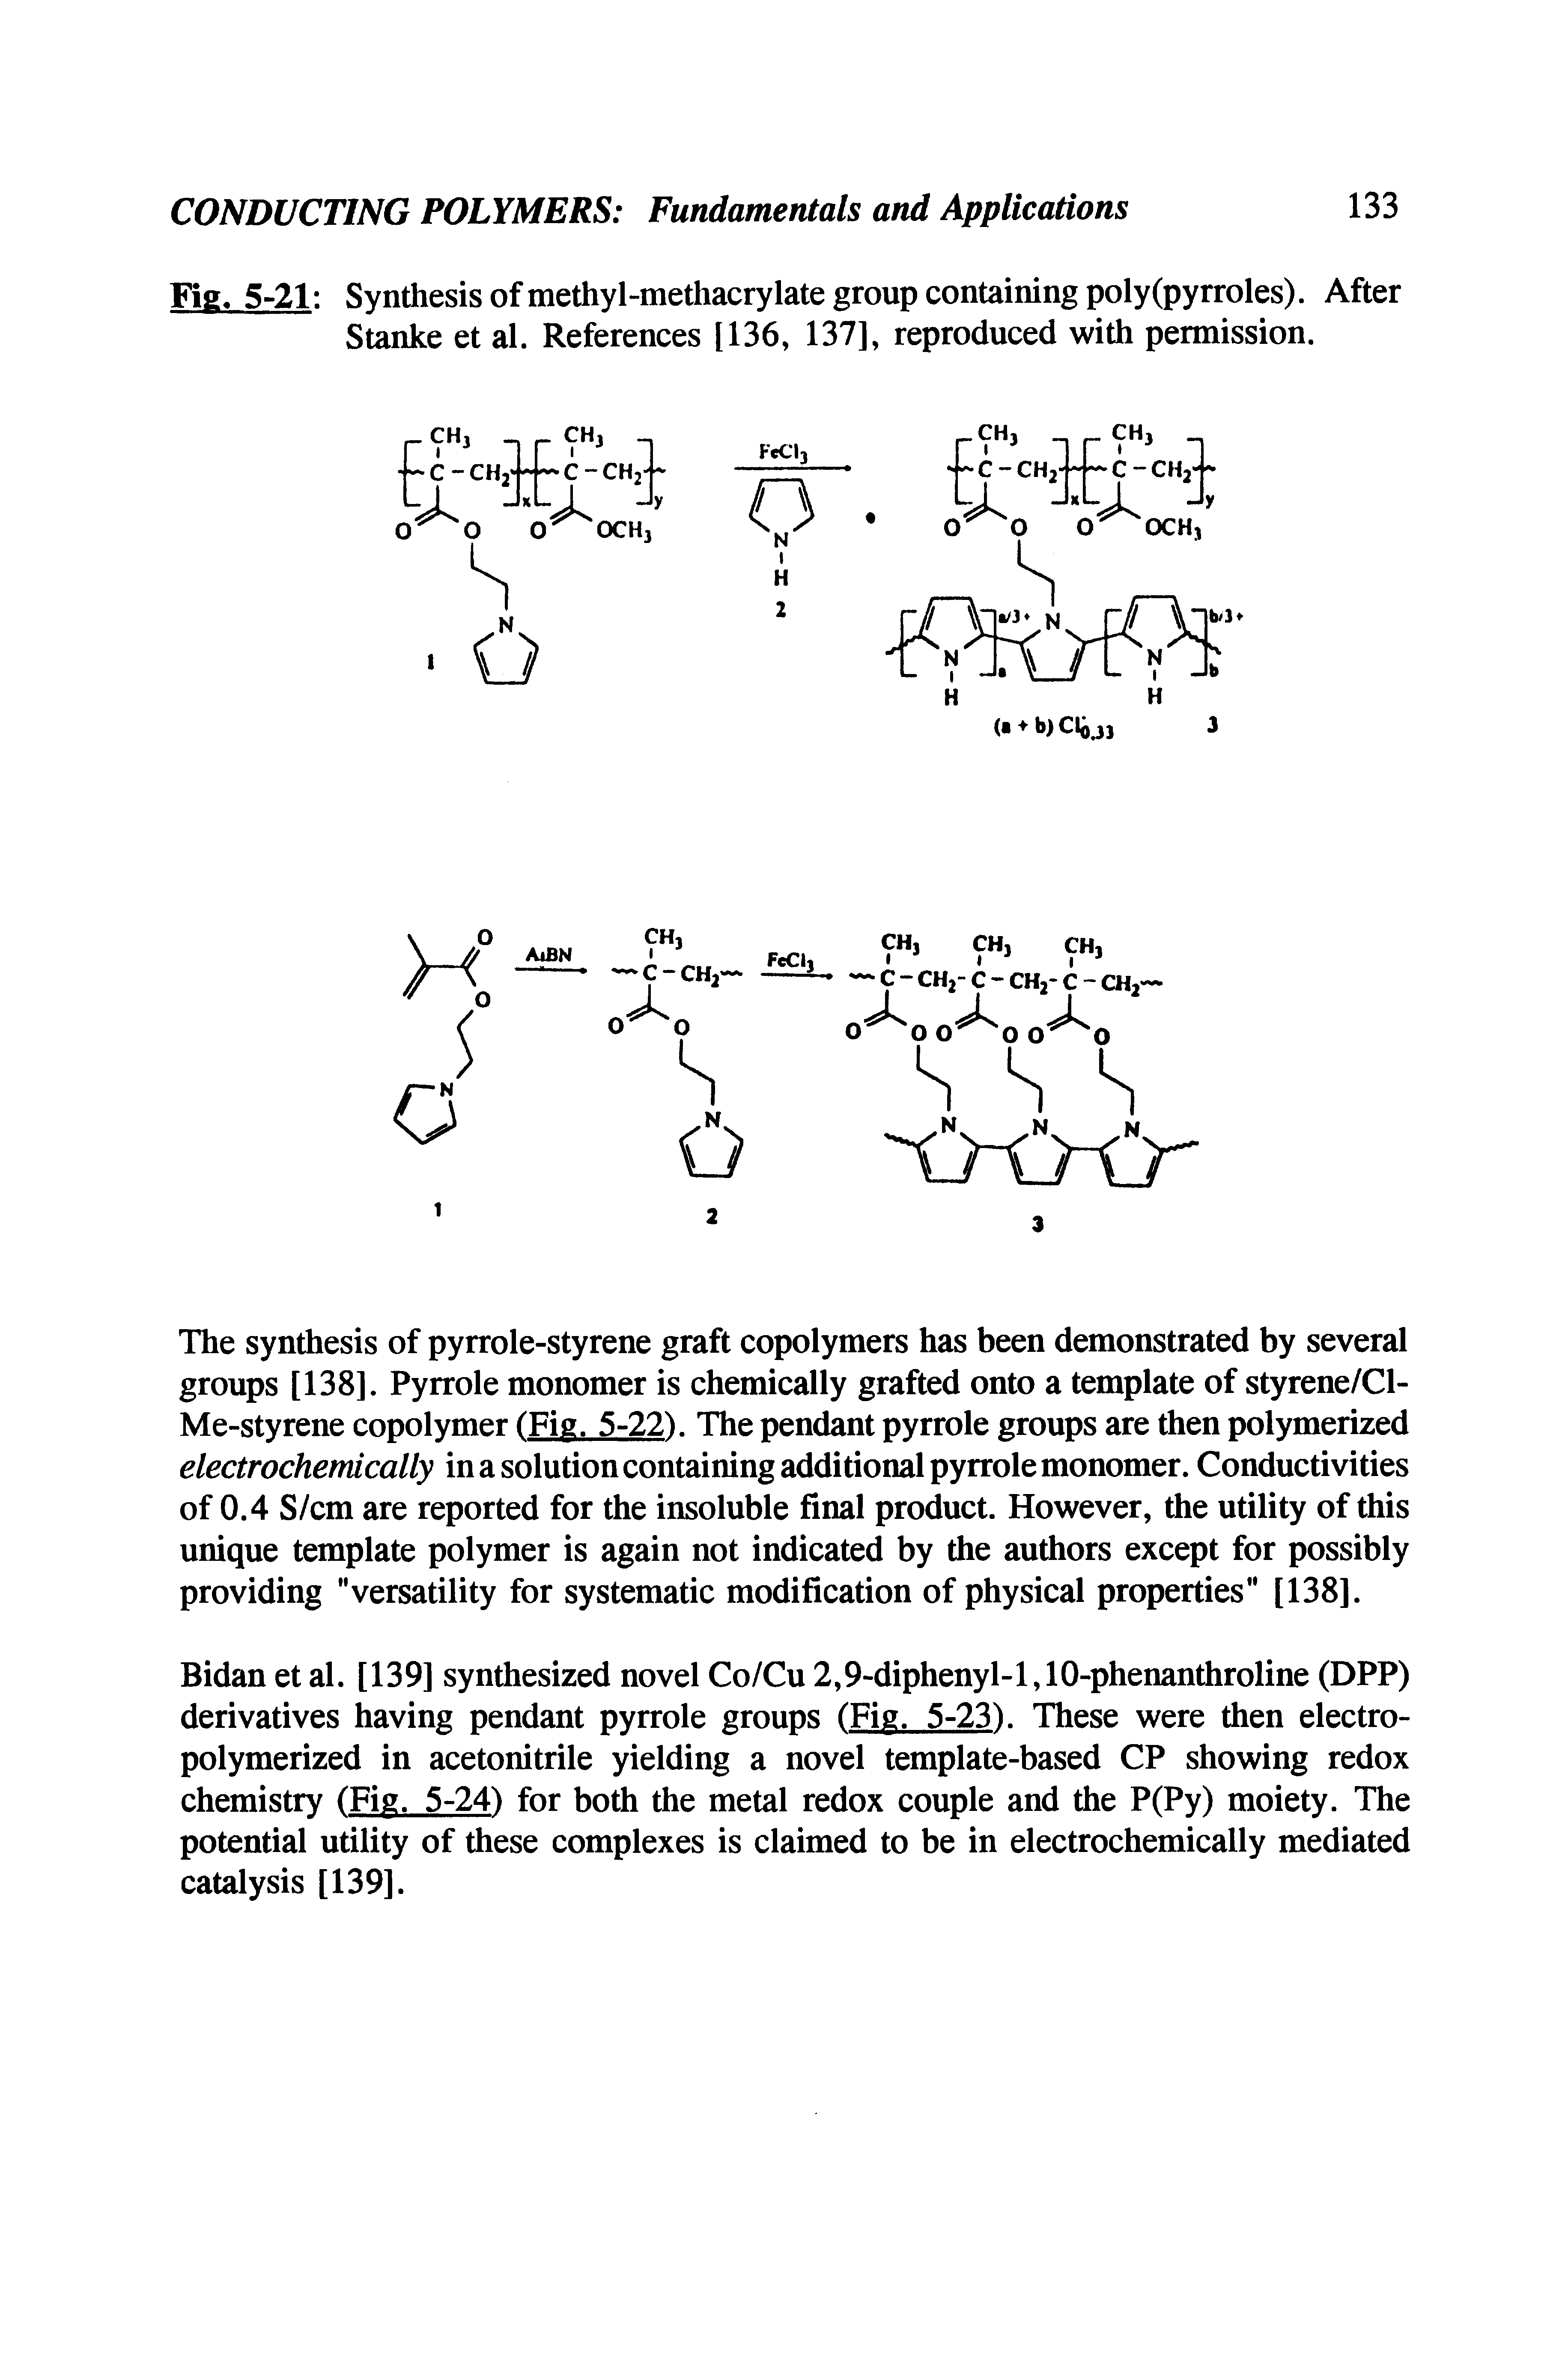 Fig. 5-21 Synthesis of methyl-methacrylate group containing poly(pyrroles). After Stanke et al. References [136, 137], reproduced with permission.